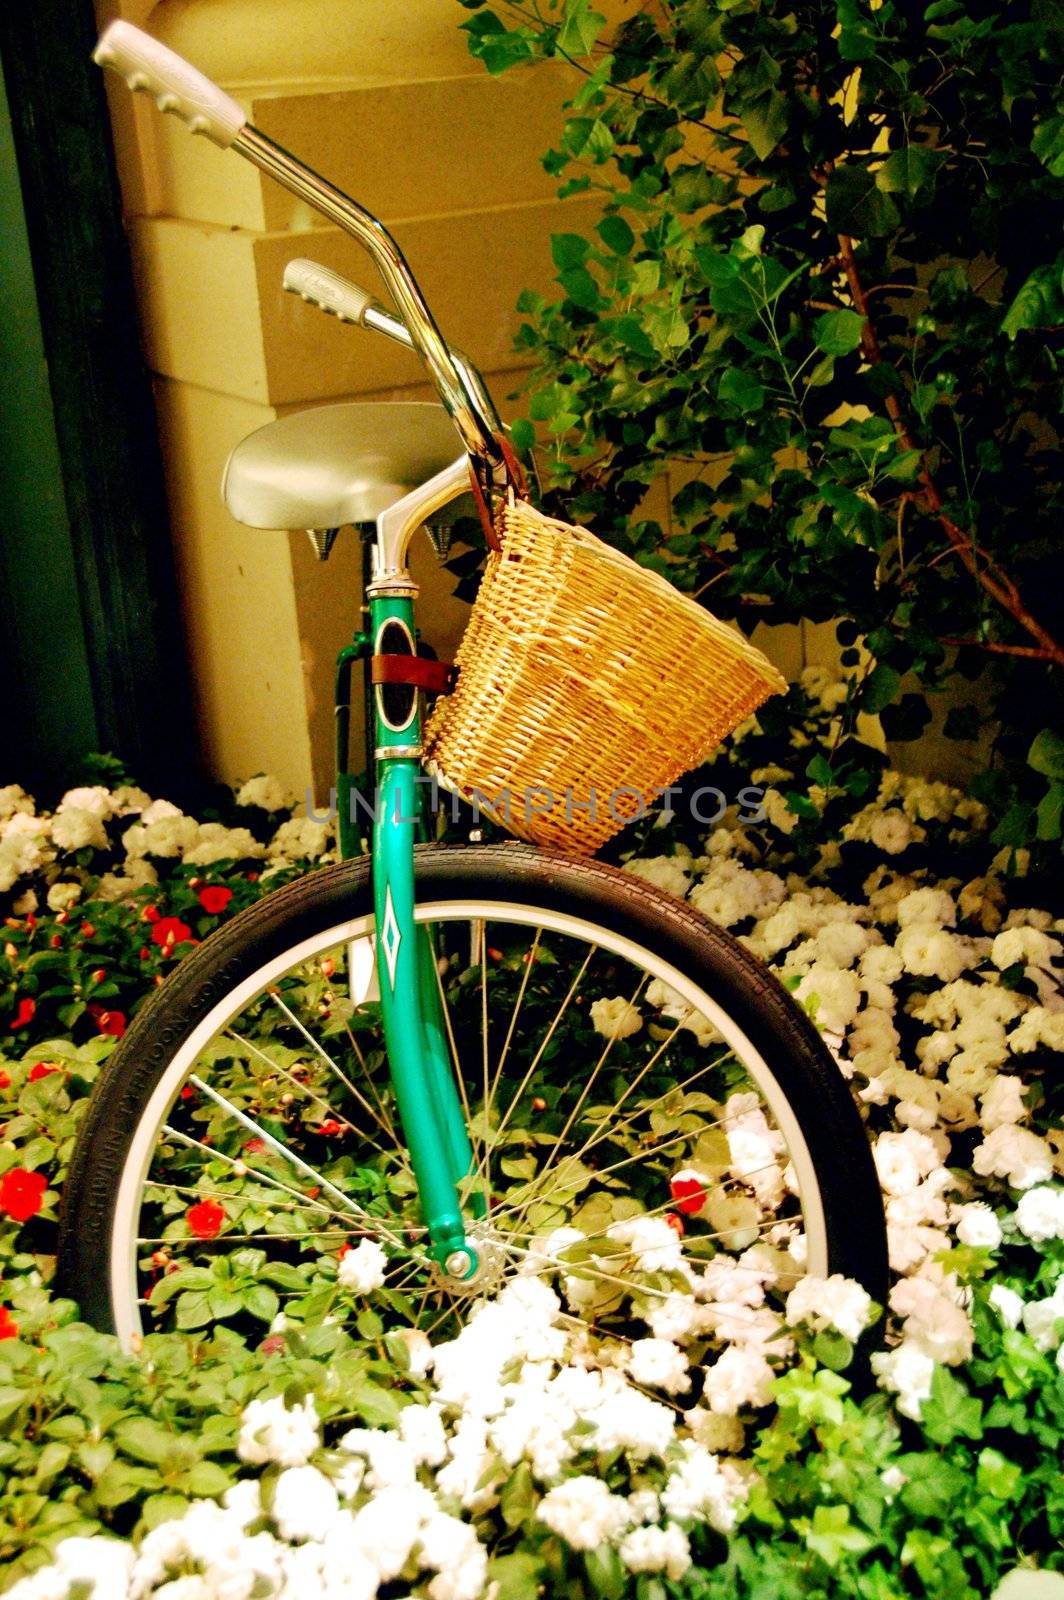 Cycle with flowers in garden by nikonite